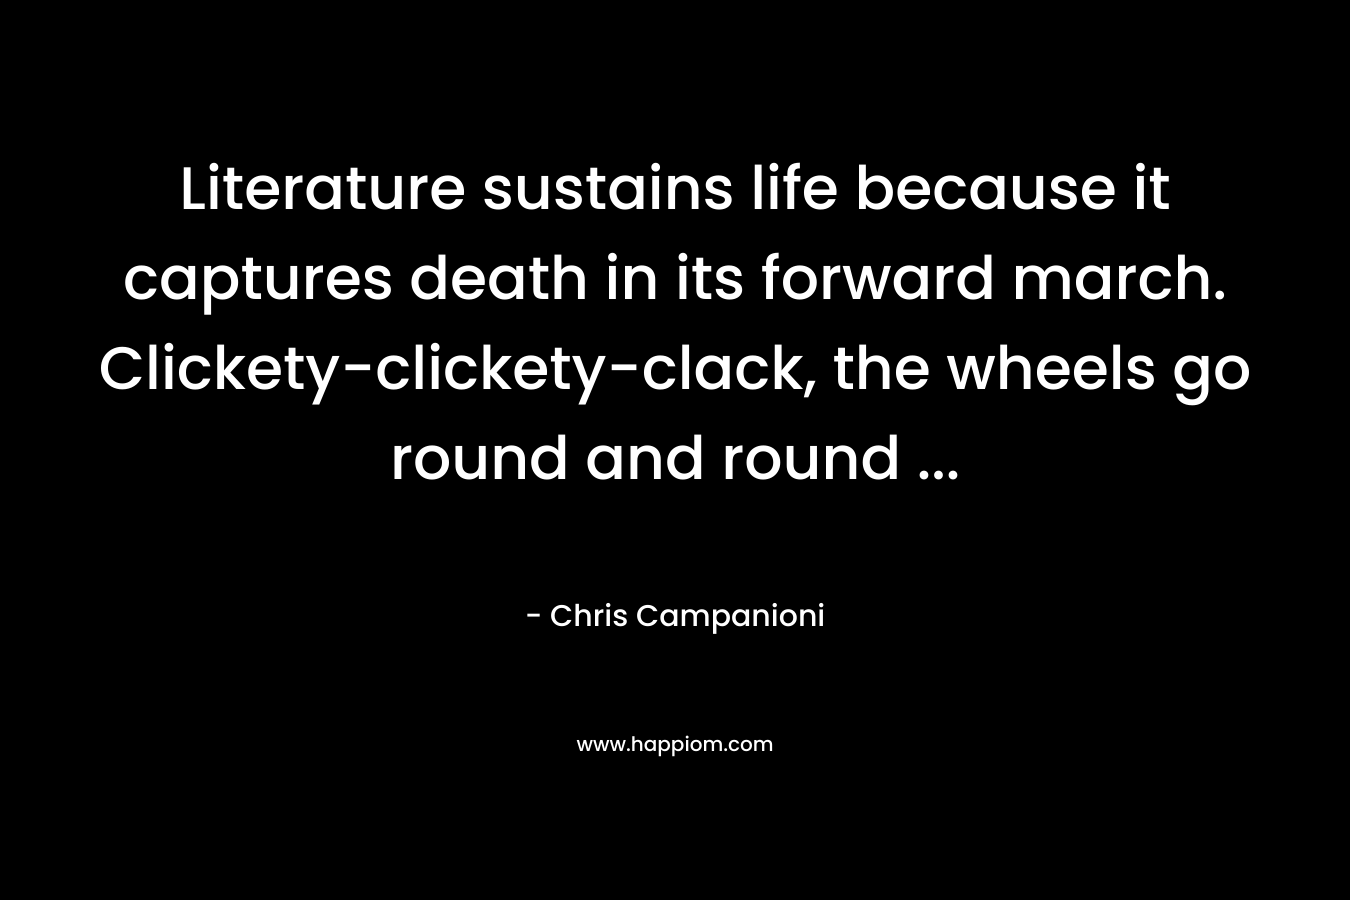 Literature sustains life because it captures death in its forward march. Clickety-clickety-clack, the wheels go round and round … – Chris Campanioni